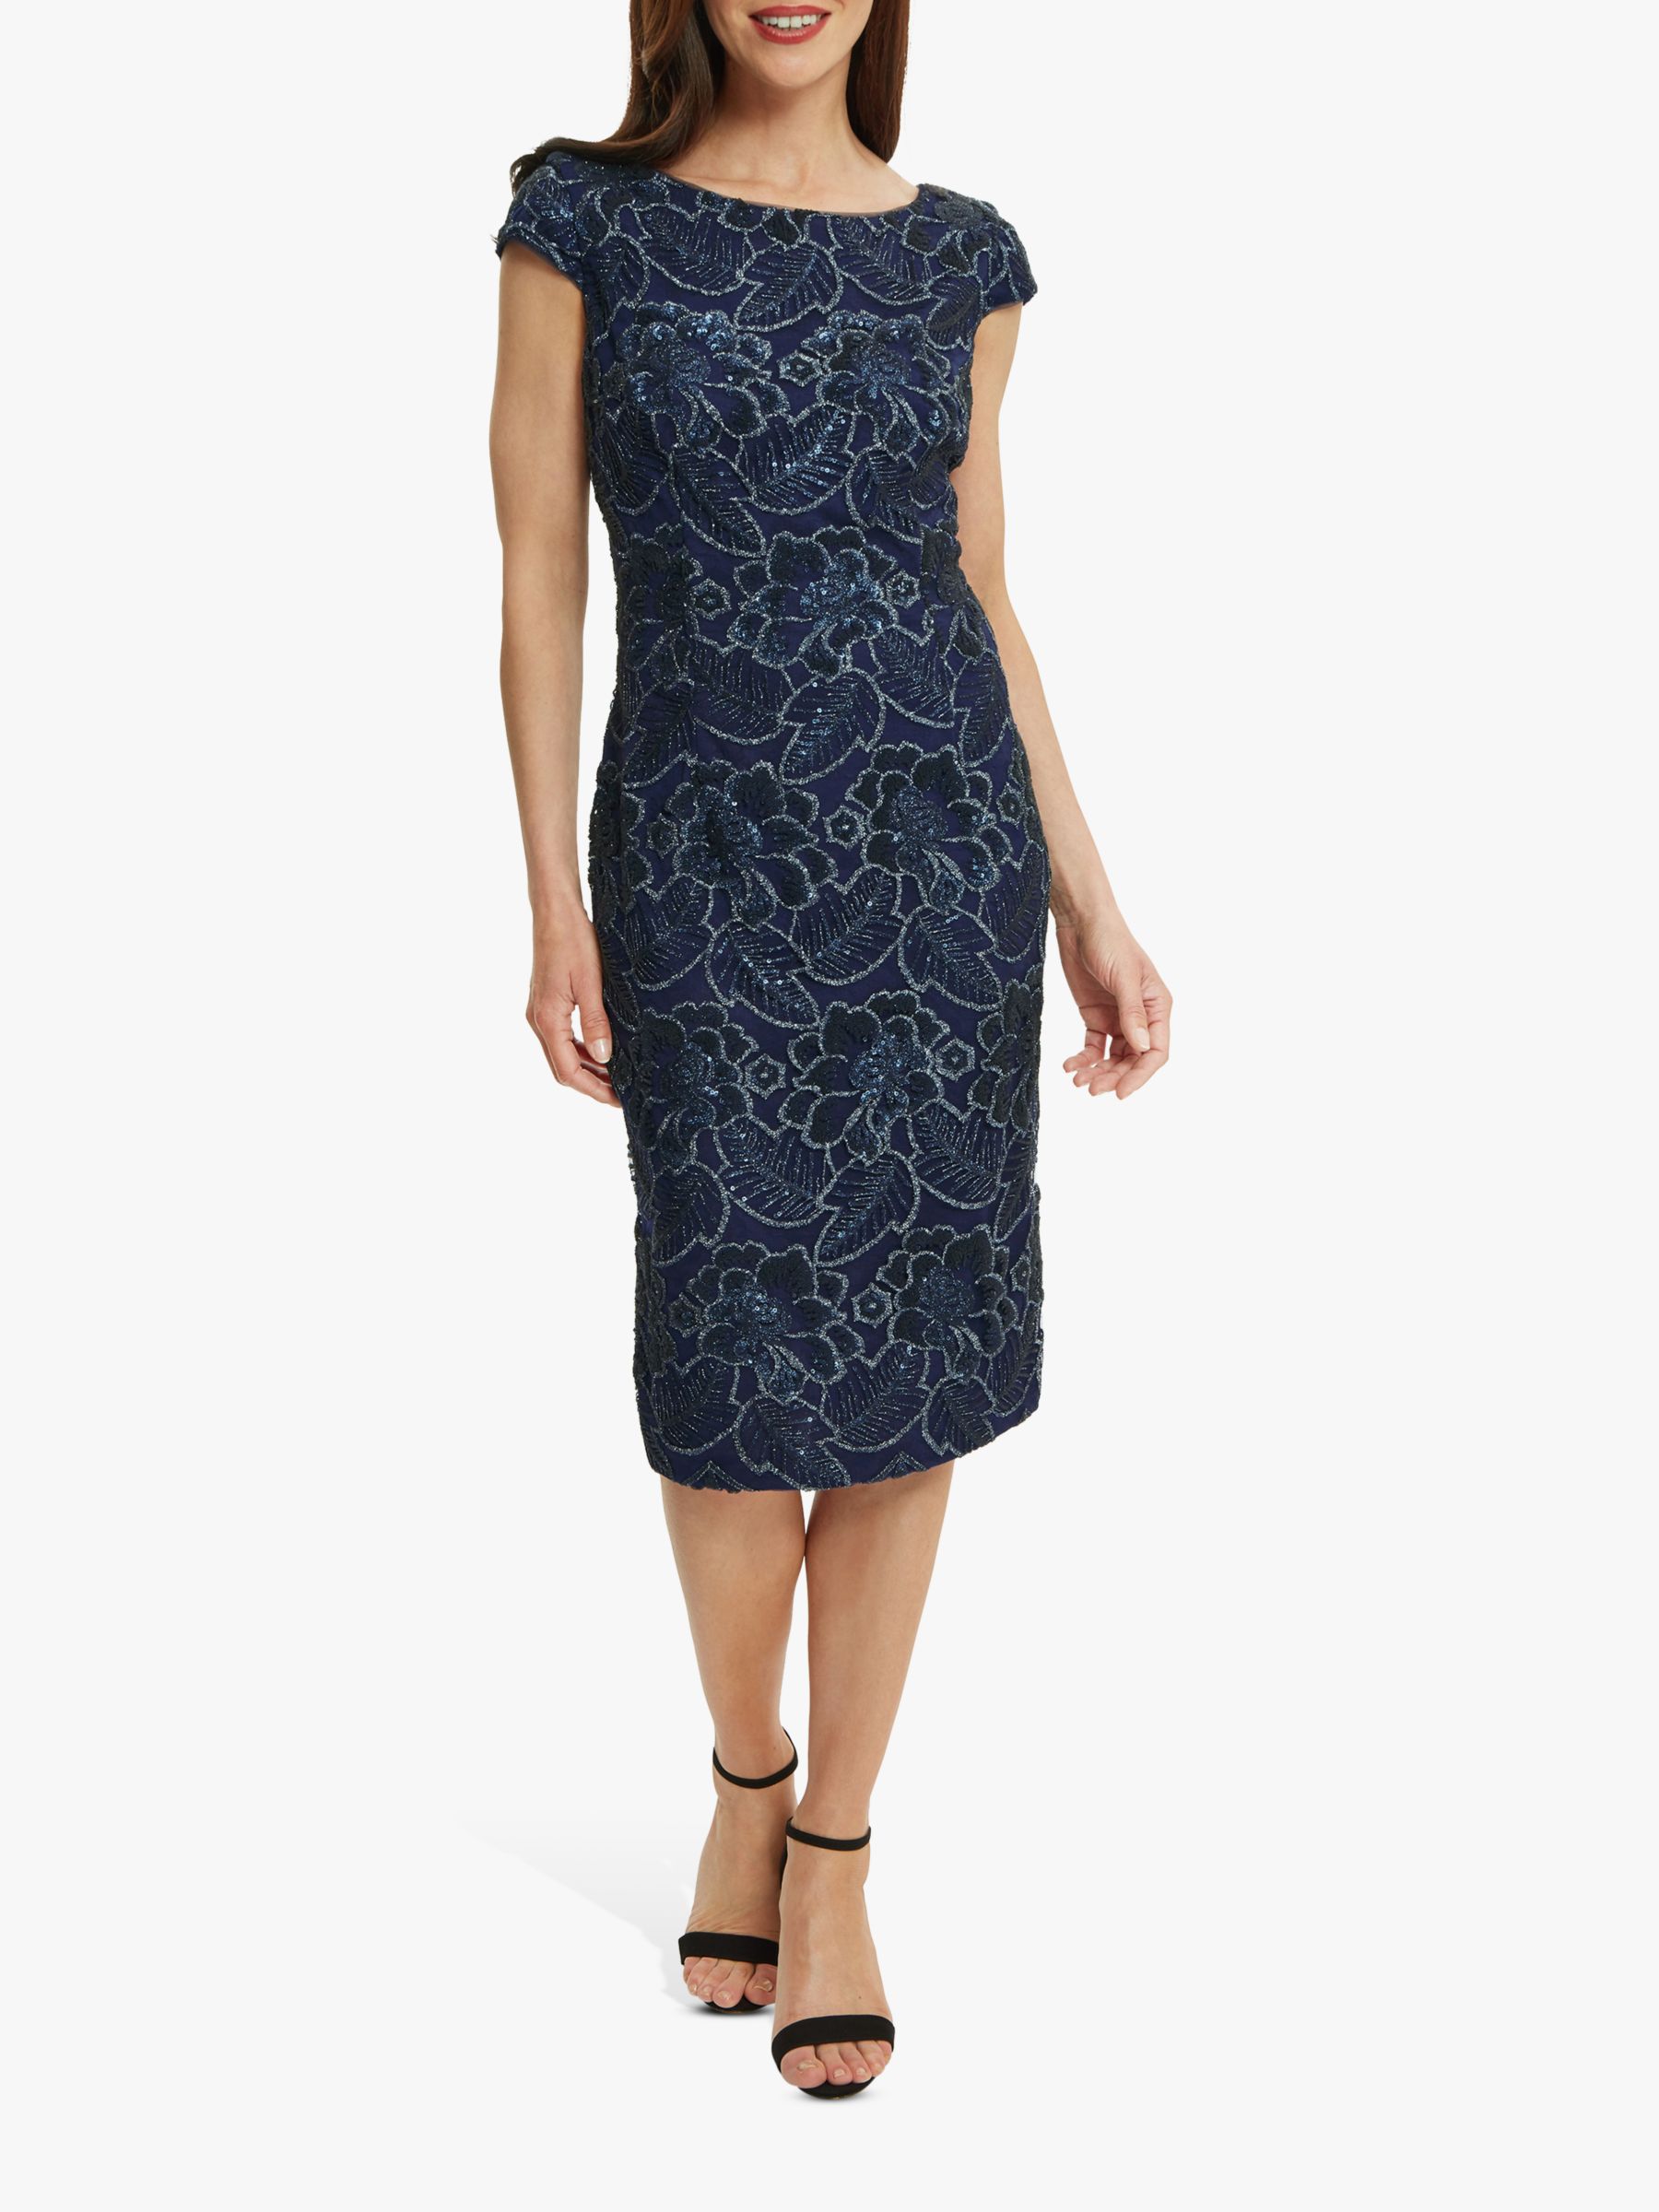 Gina Bacconi Xena Floral Lace Cocktail Dress, Navy at John Lewis & Partners